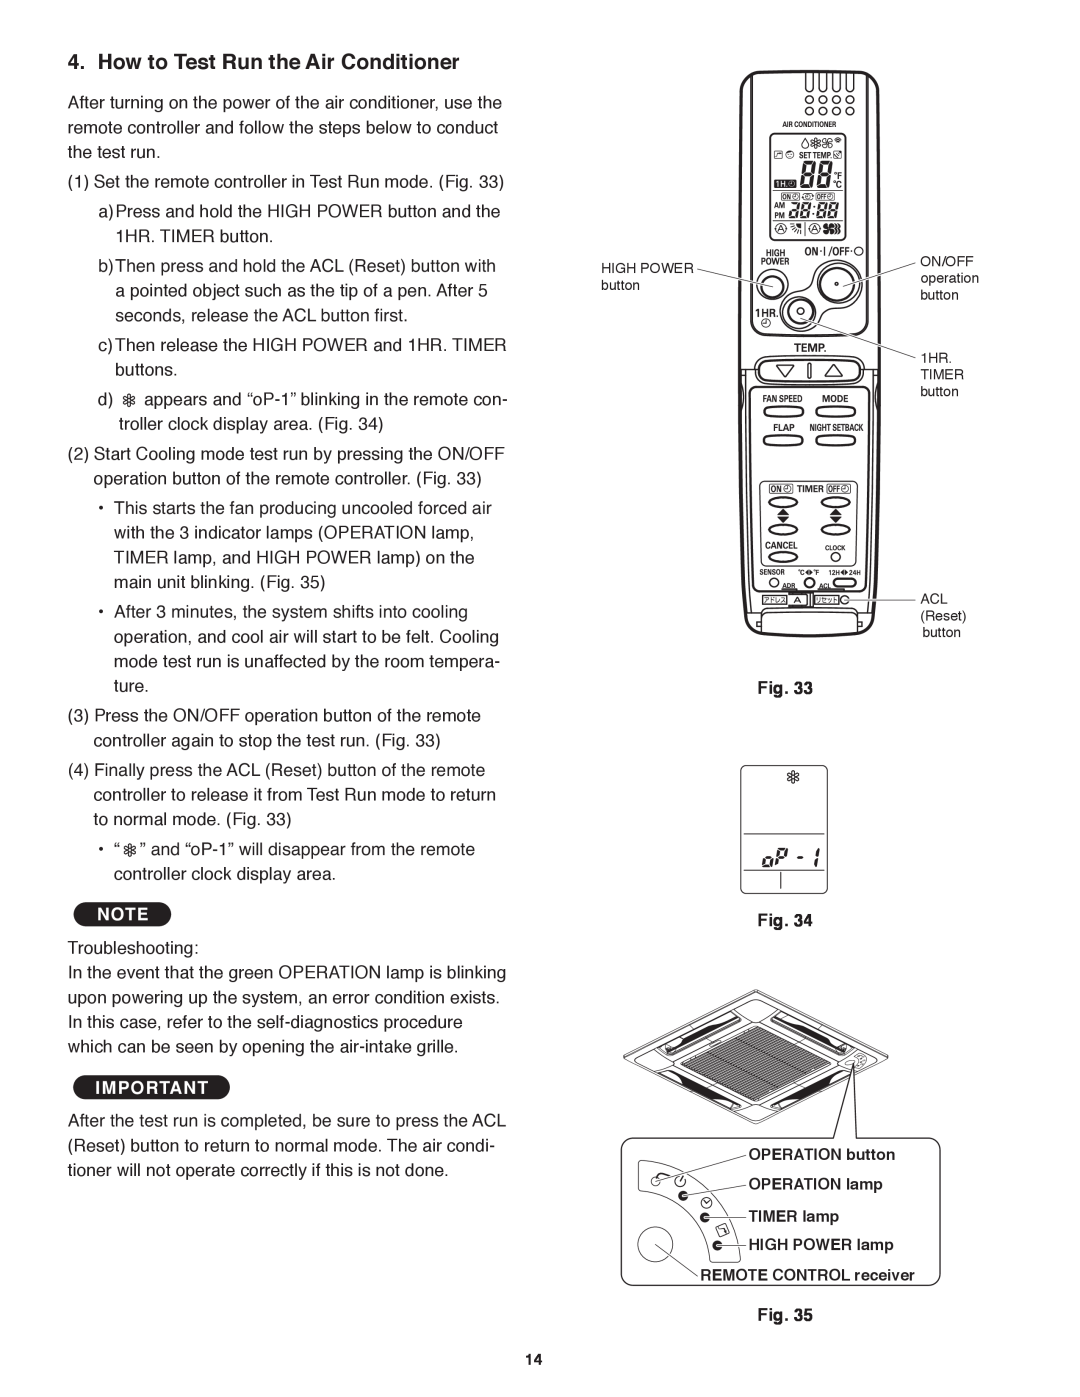 Panasonic R410A service manual How to Test Run the Air Conditioner, Fig. Fig 